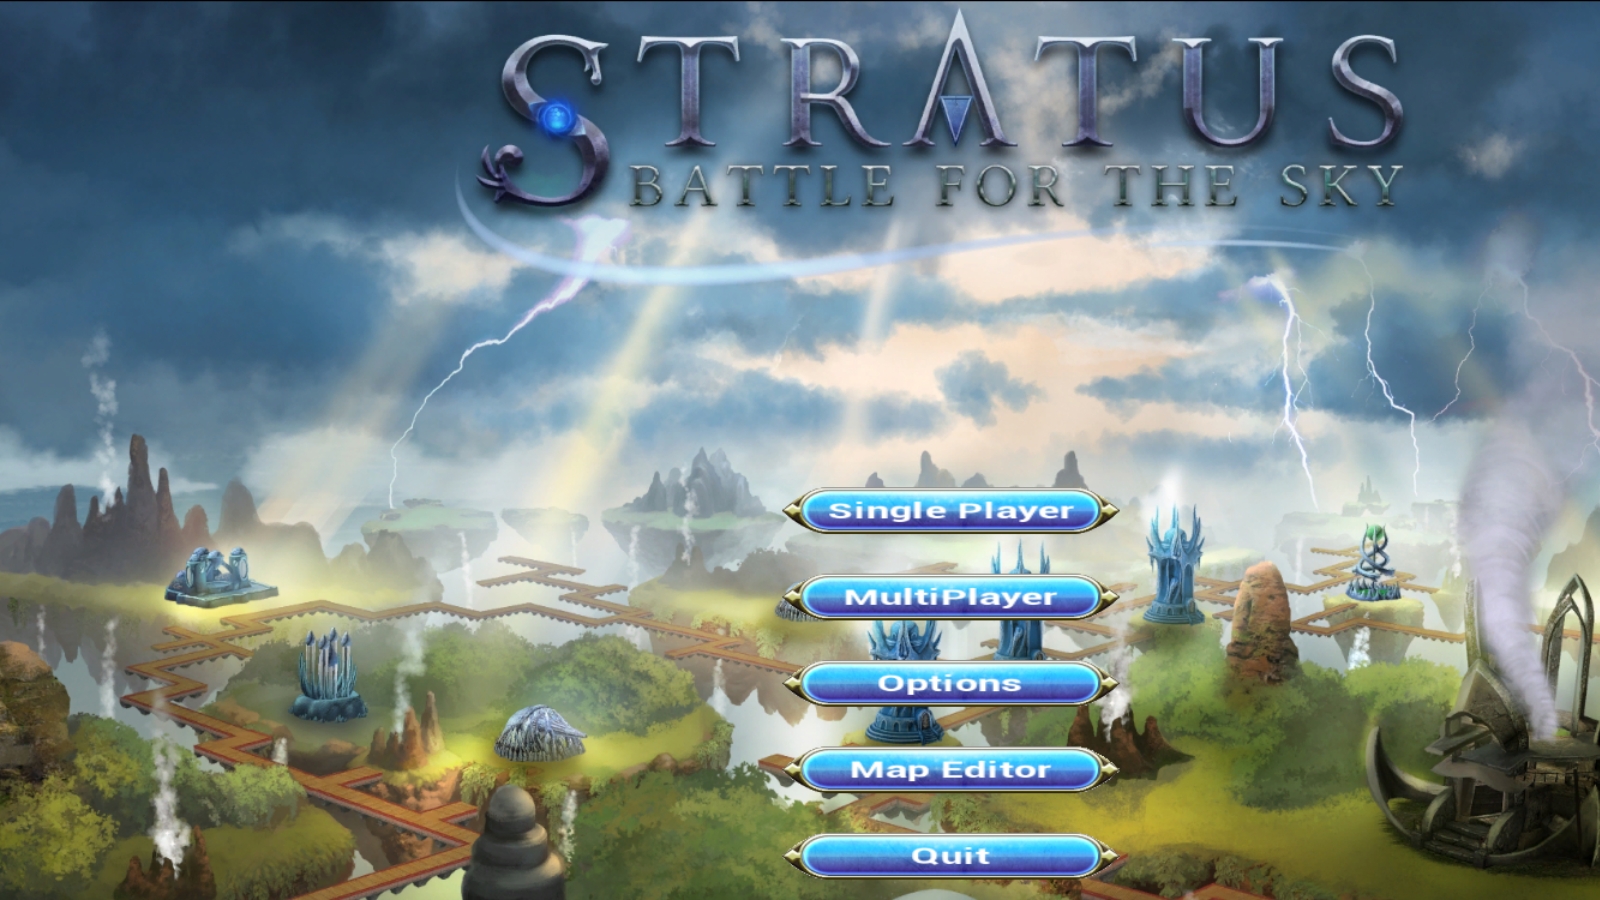 Stratus: Battle For The Sky on Steam